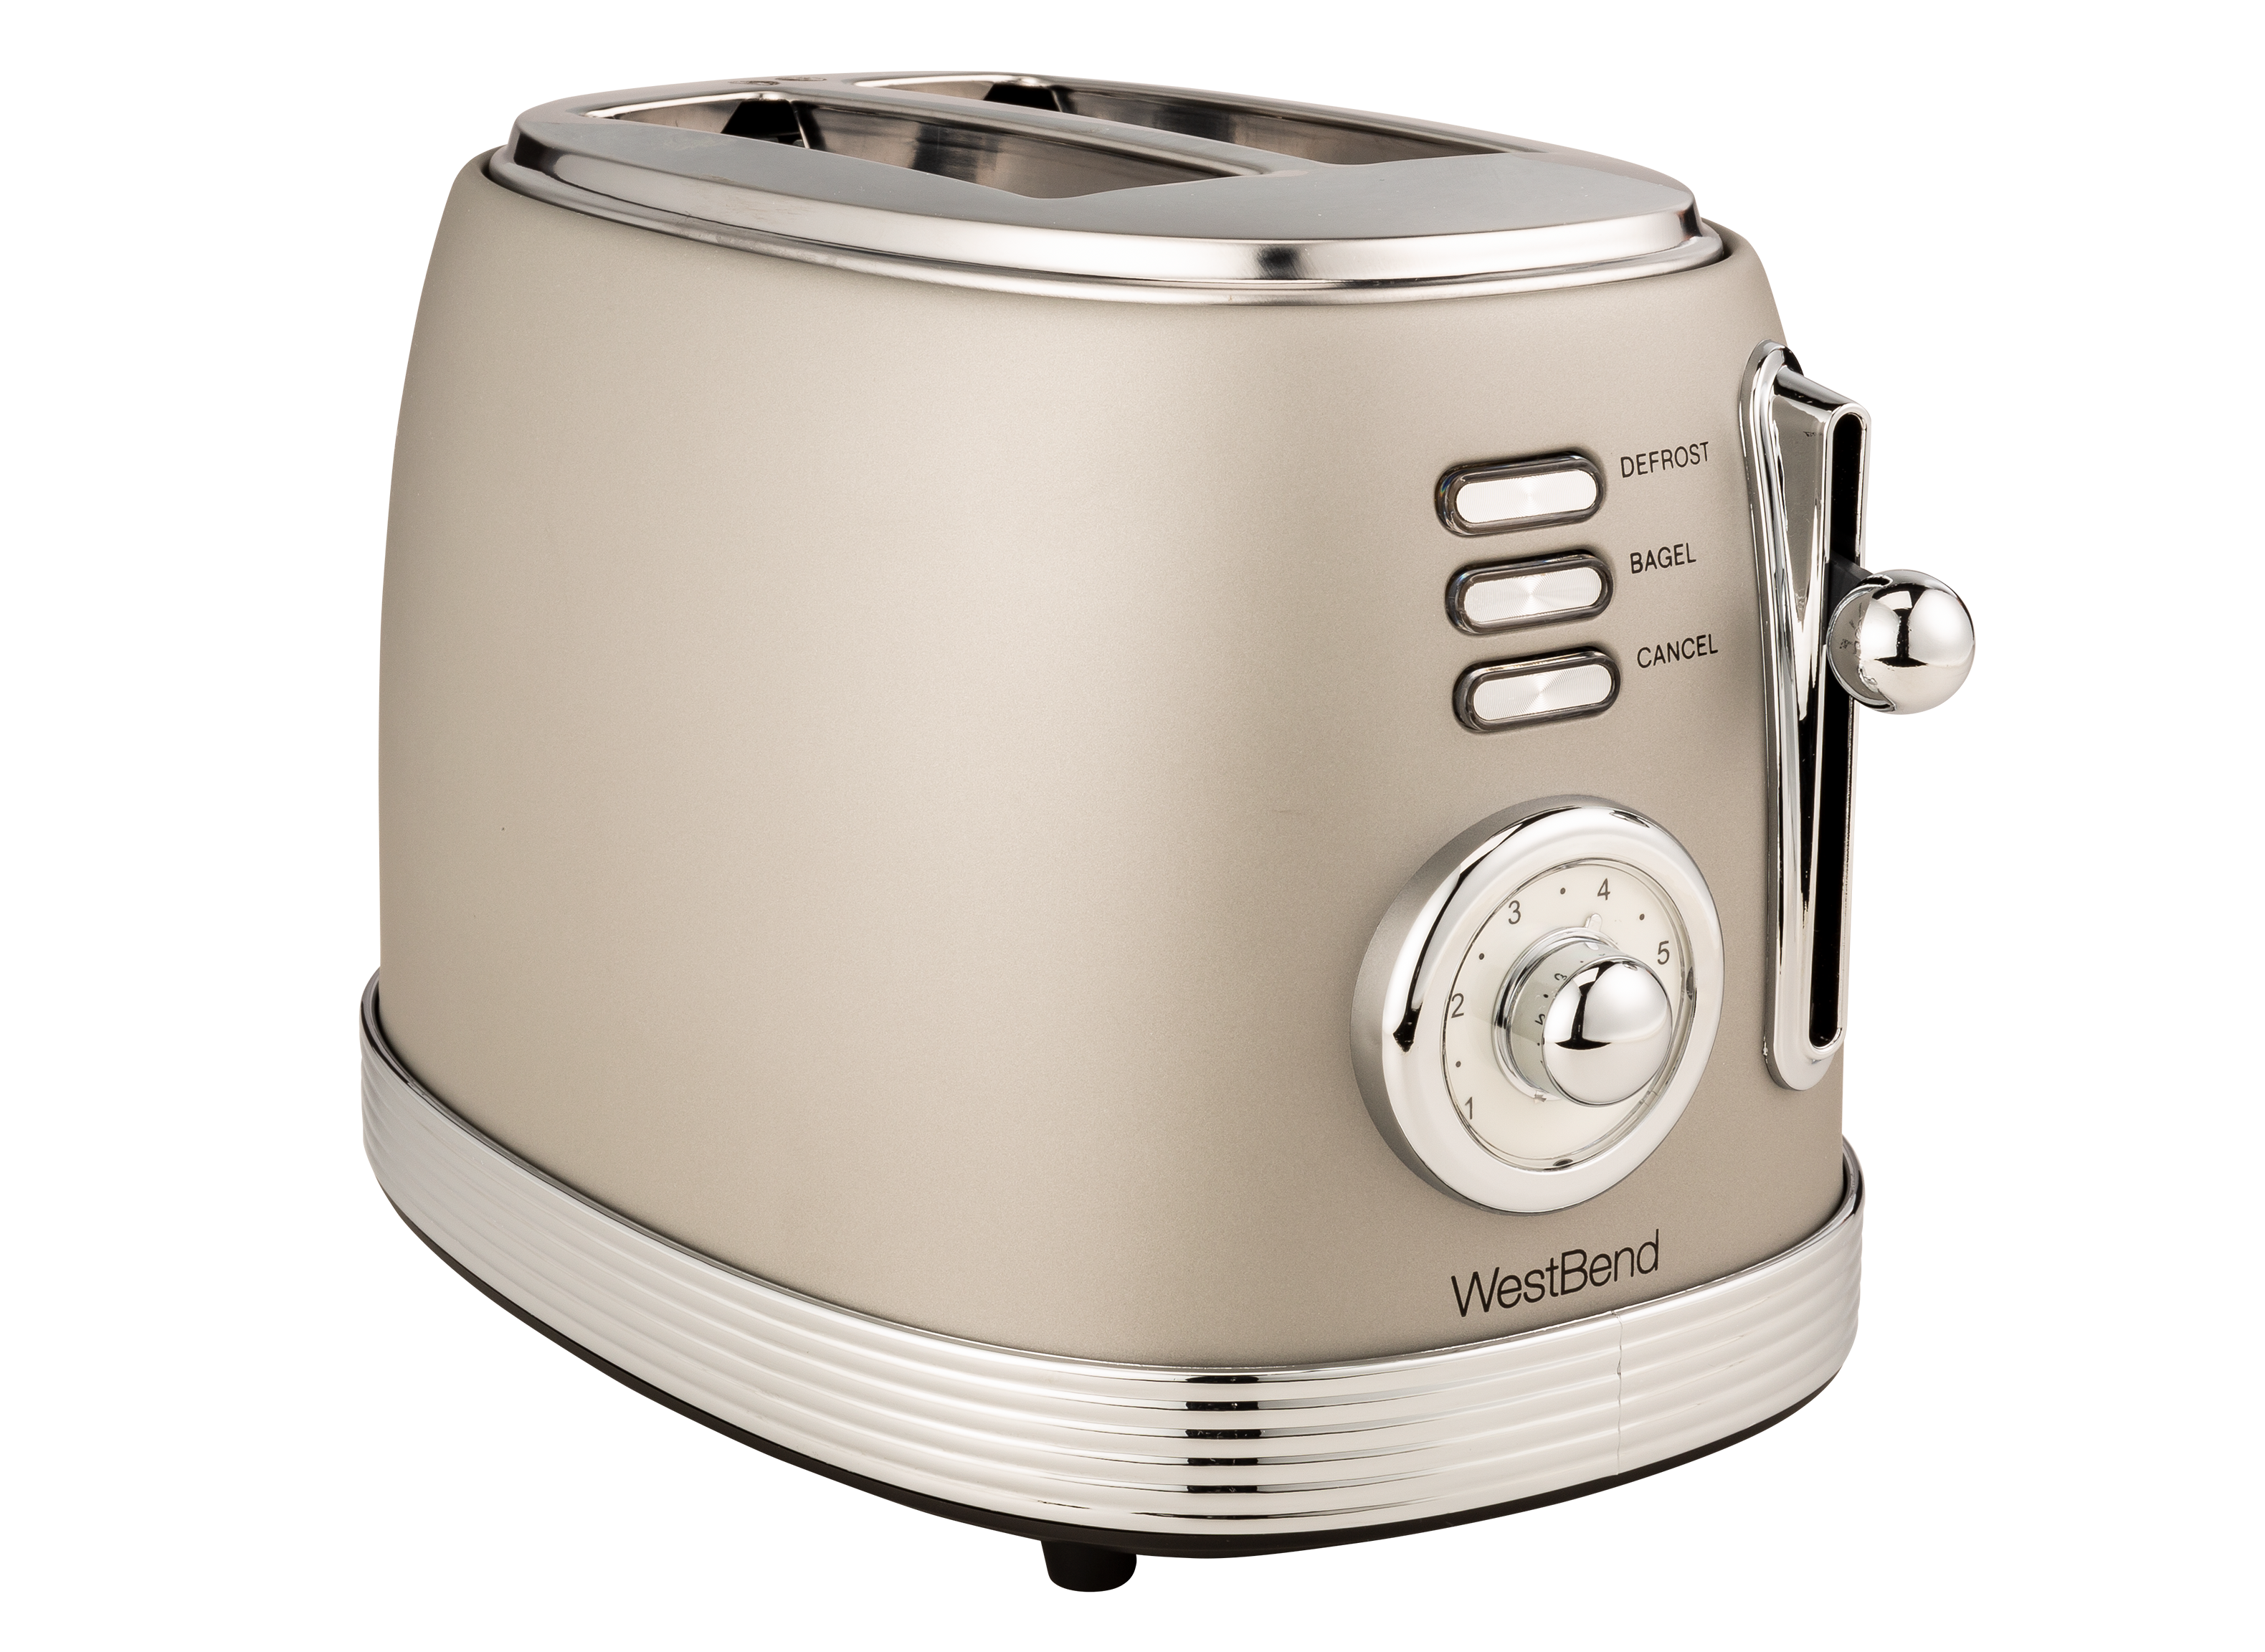 https://crdms.images.consumerreports.org/prod/products/cr/models/406538-2-slice-toasters-west-bend-2-slice-retro-toaster-10030613.png